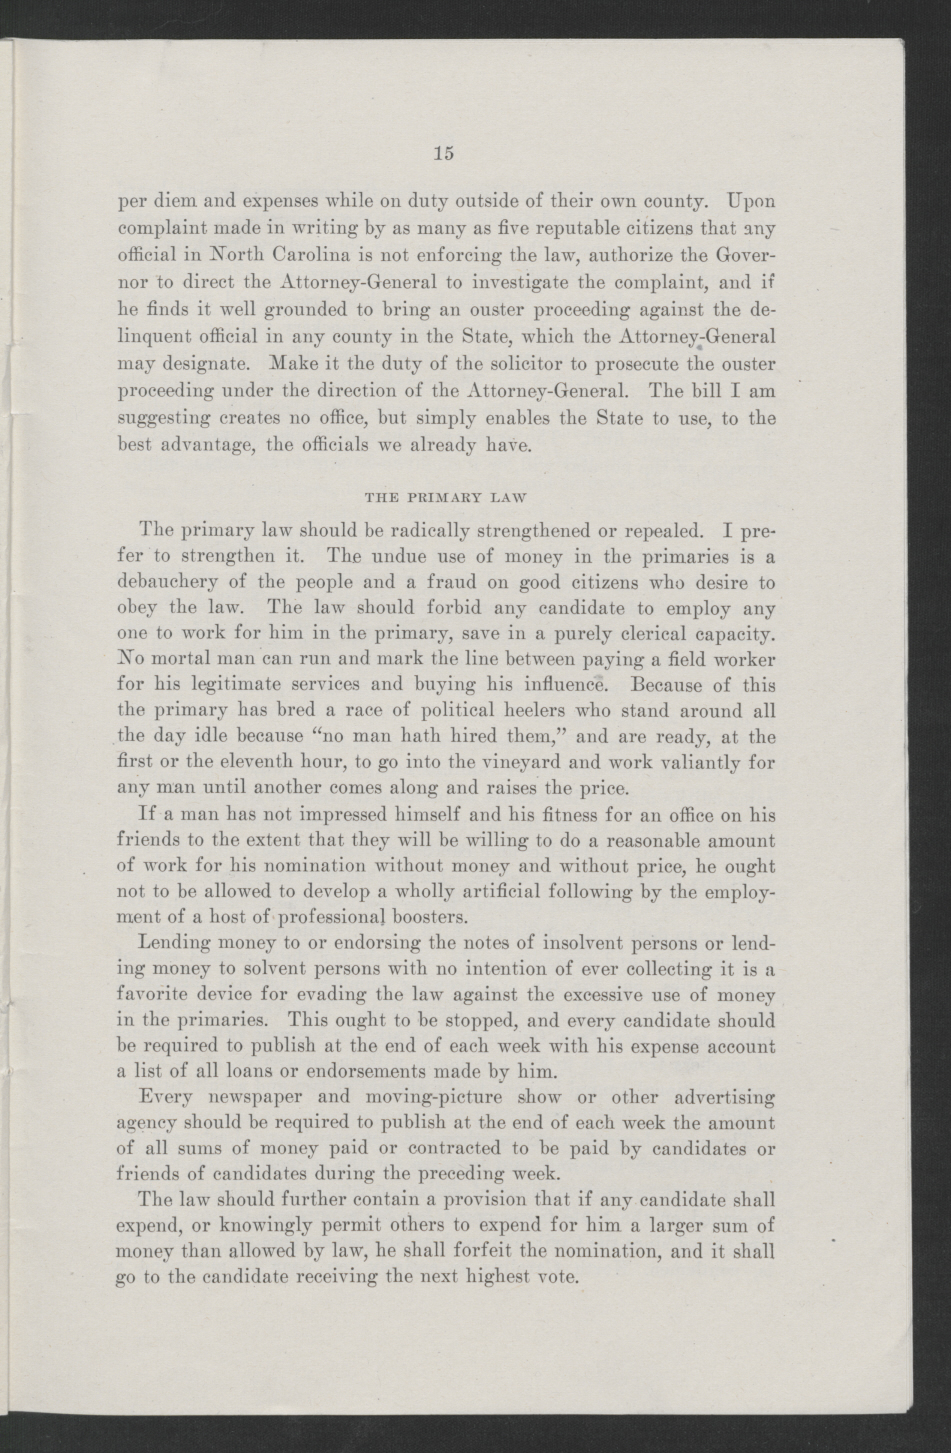 Biennial Message of Governor Thomas W. Bickett to the General Assembly, January 9, 1919, page 13